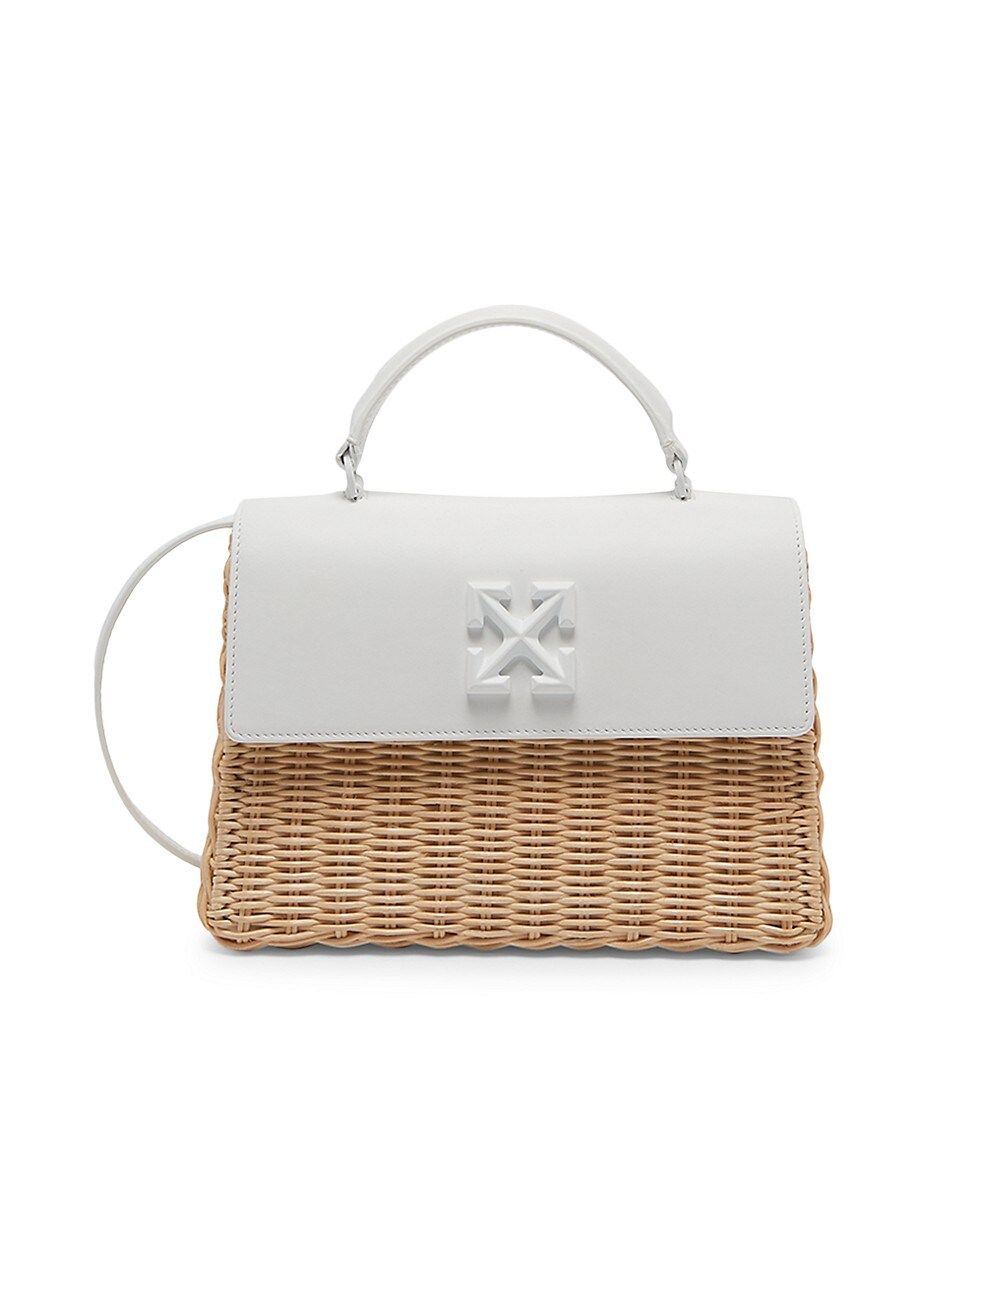 Off-White Jitney Tote Bag in Straw and Leather